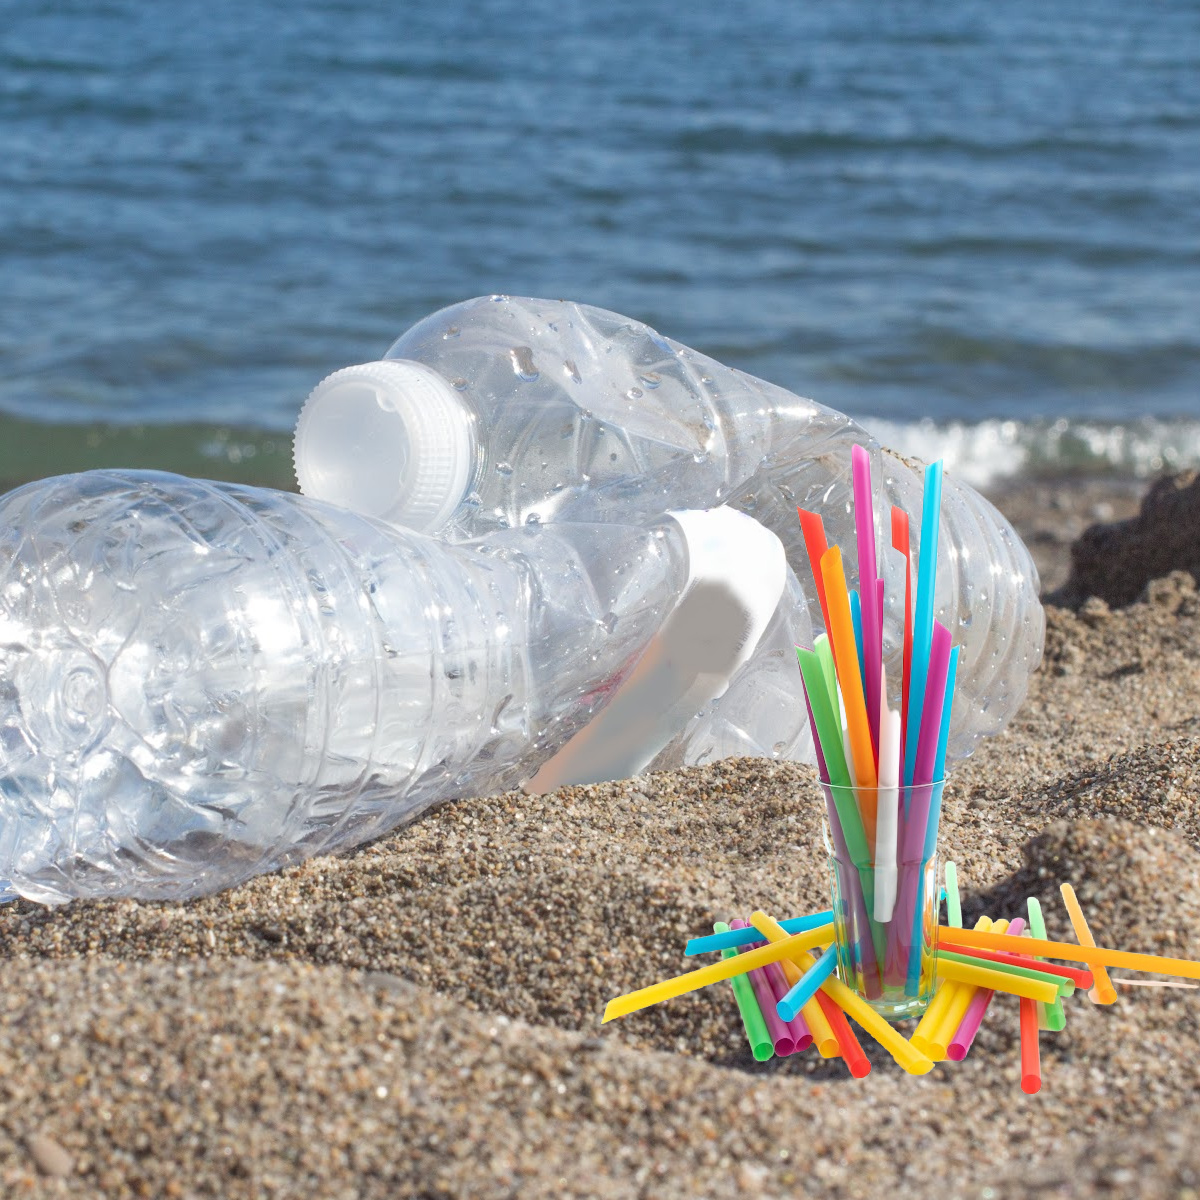 Image of single use plastic bottles and straws on a beach